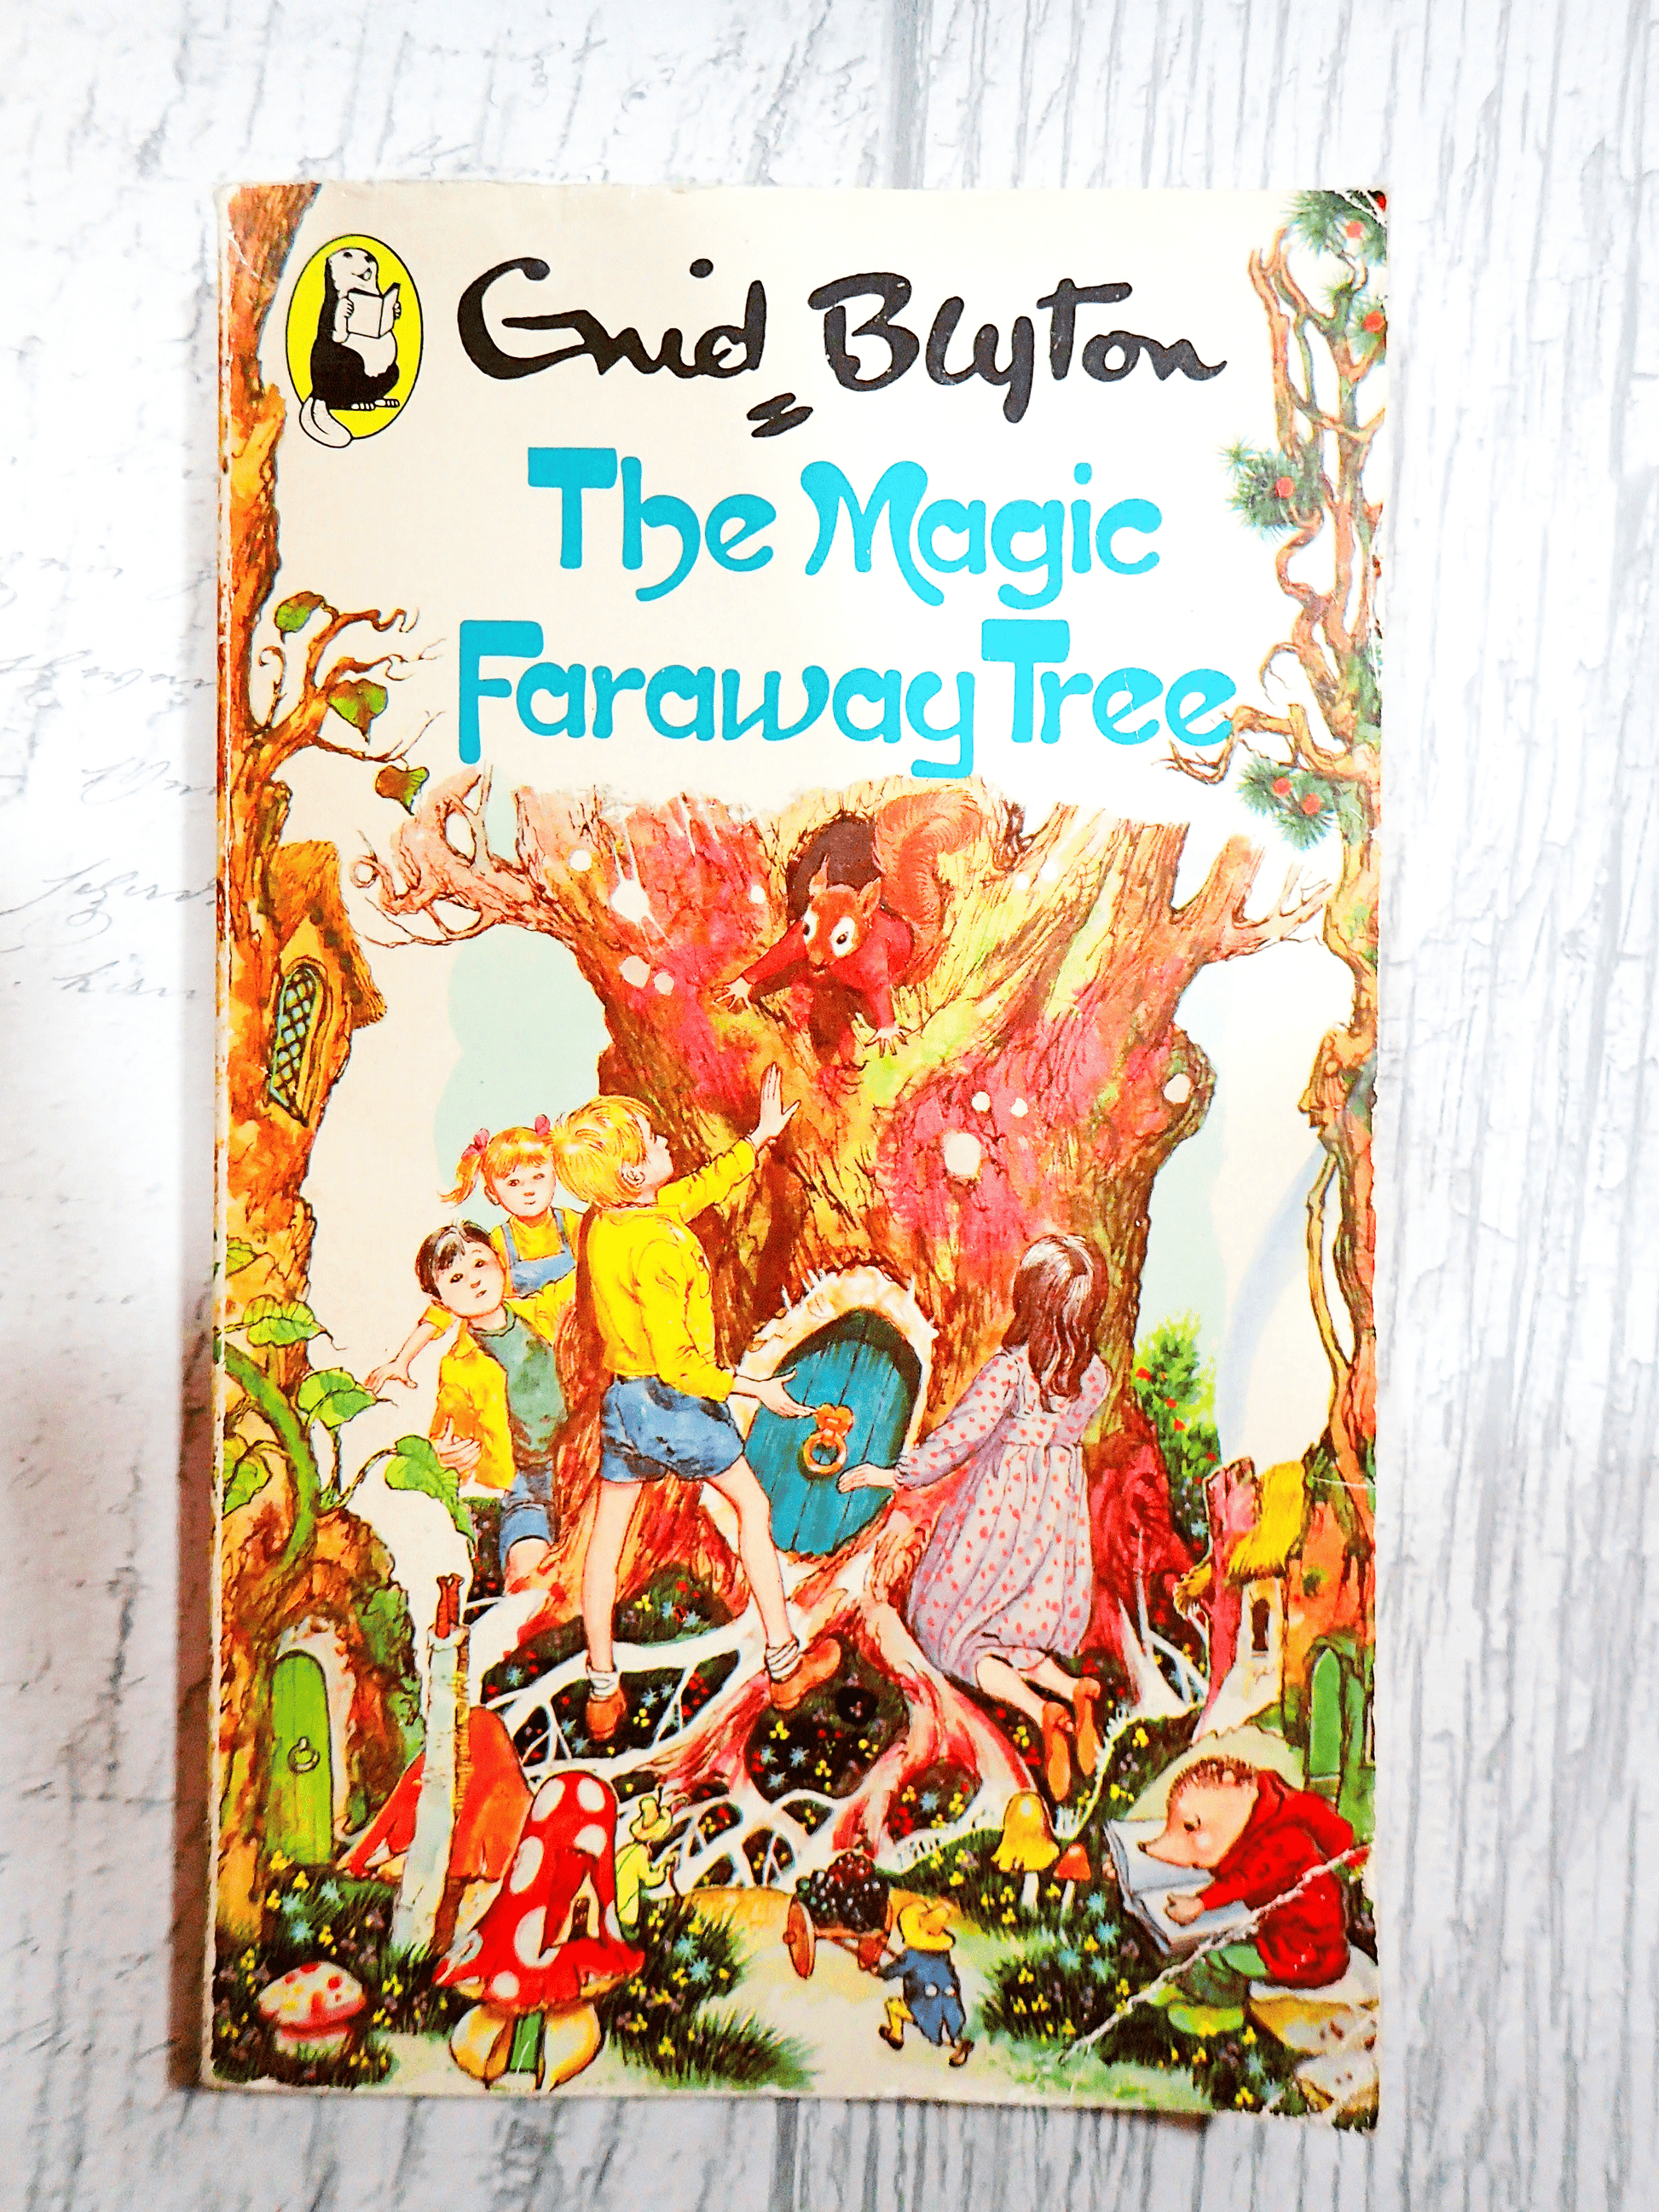 Front cover of The Magic Faraway Tree by Enid Blyton Beaver Paperback Vintage Children's Book 1980's showing children in a magical forest with a squirrel in a tree against a light background. 